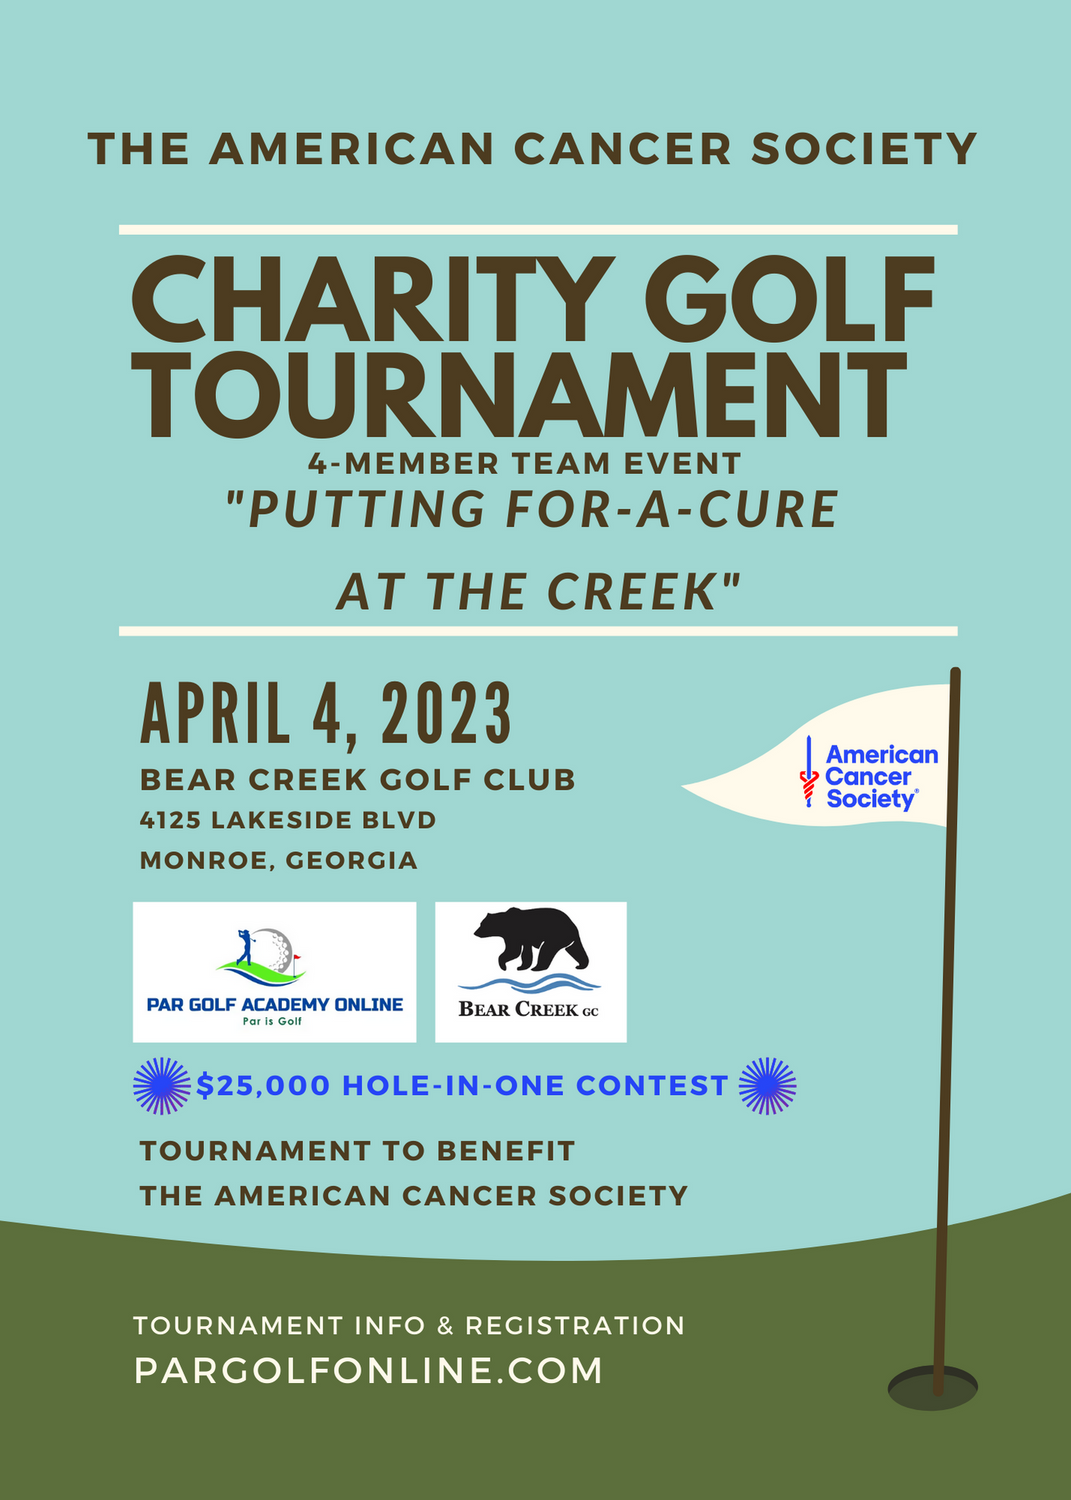 CHARITY GOLF TOURNAMENT "Putting for a Cure at the Creek" PUBLIC WELCOME